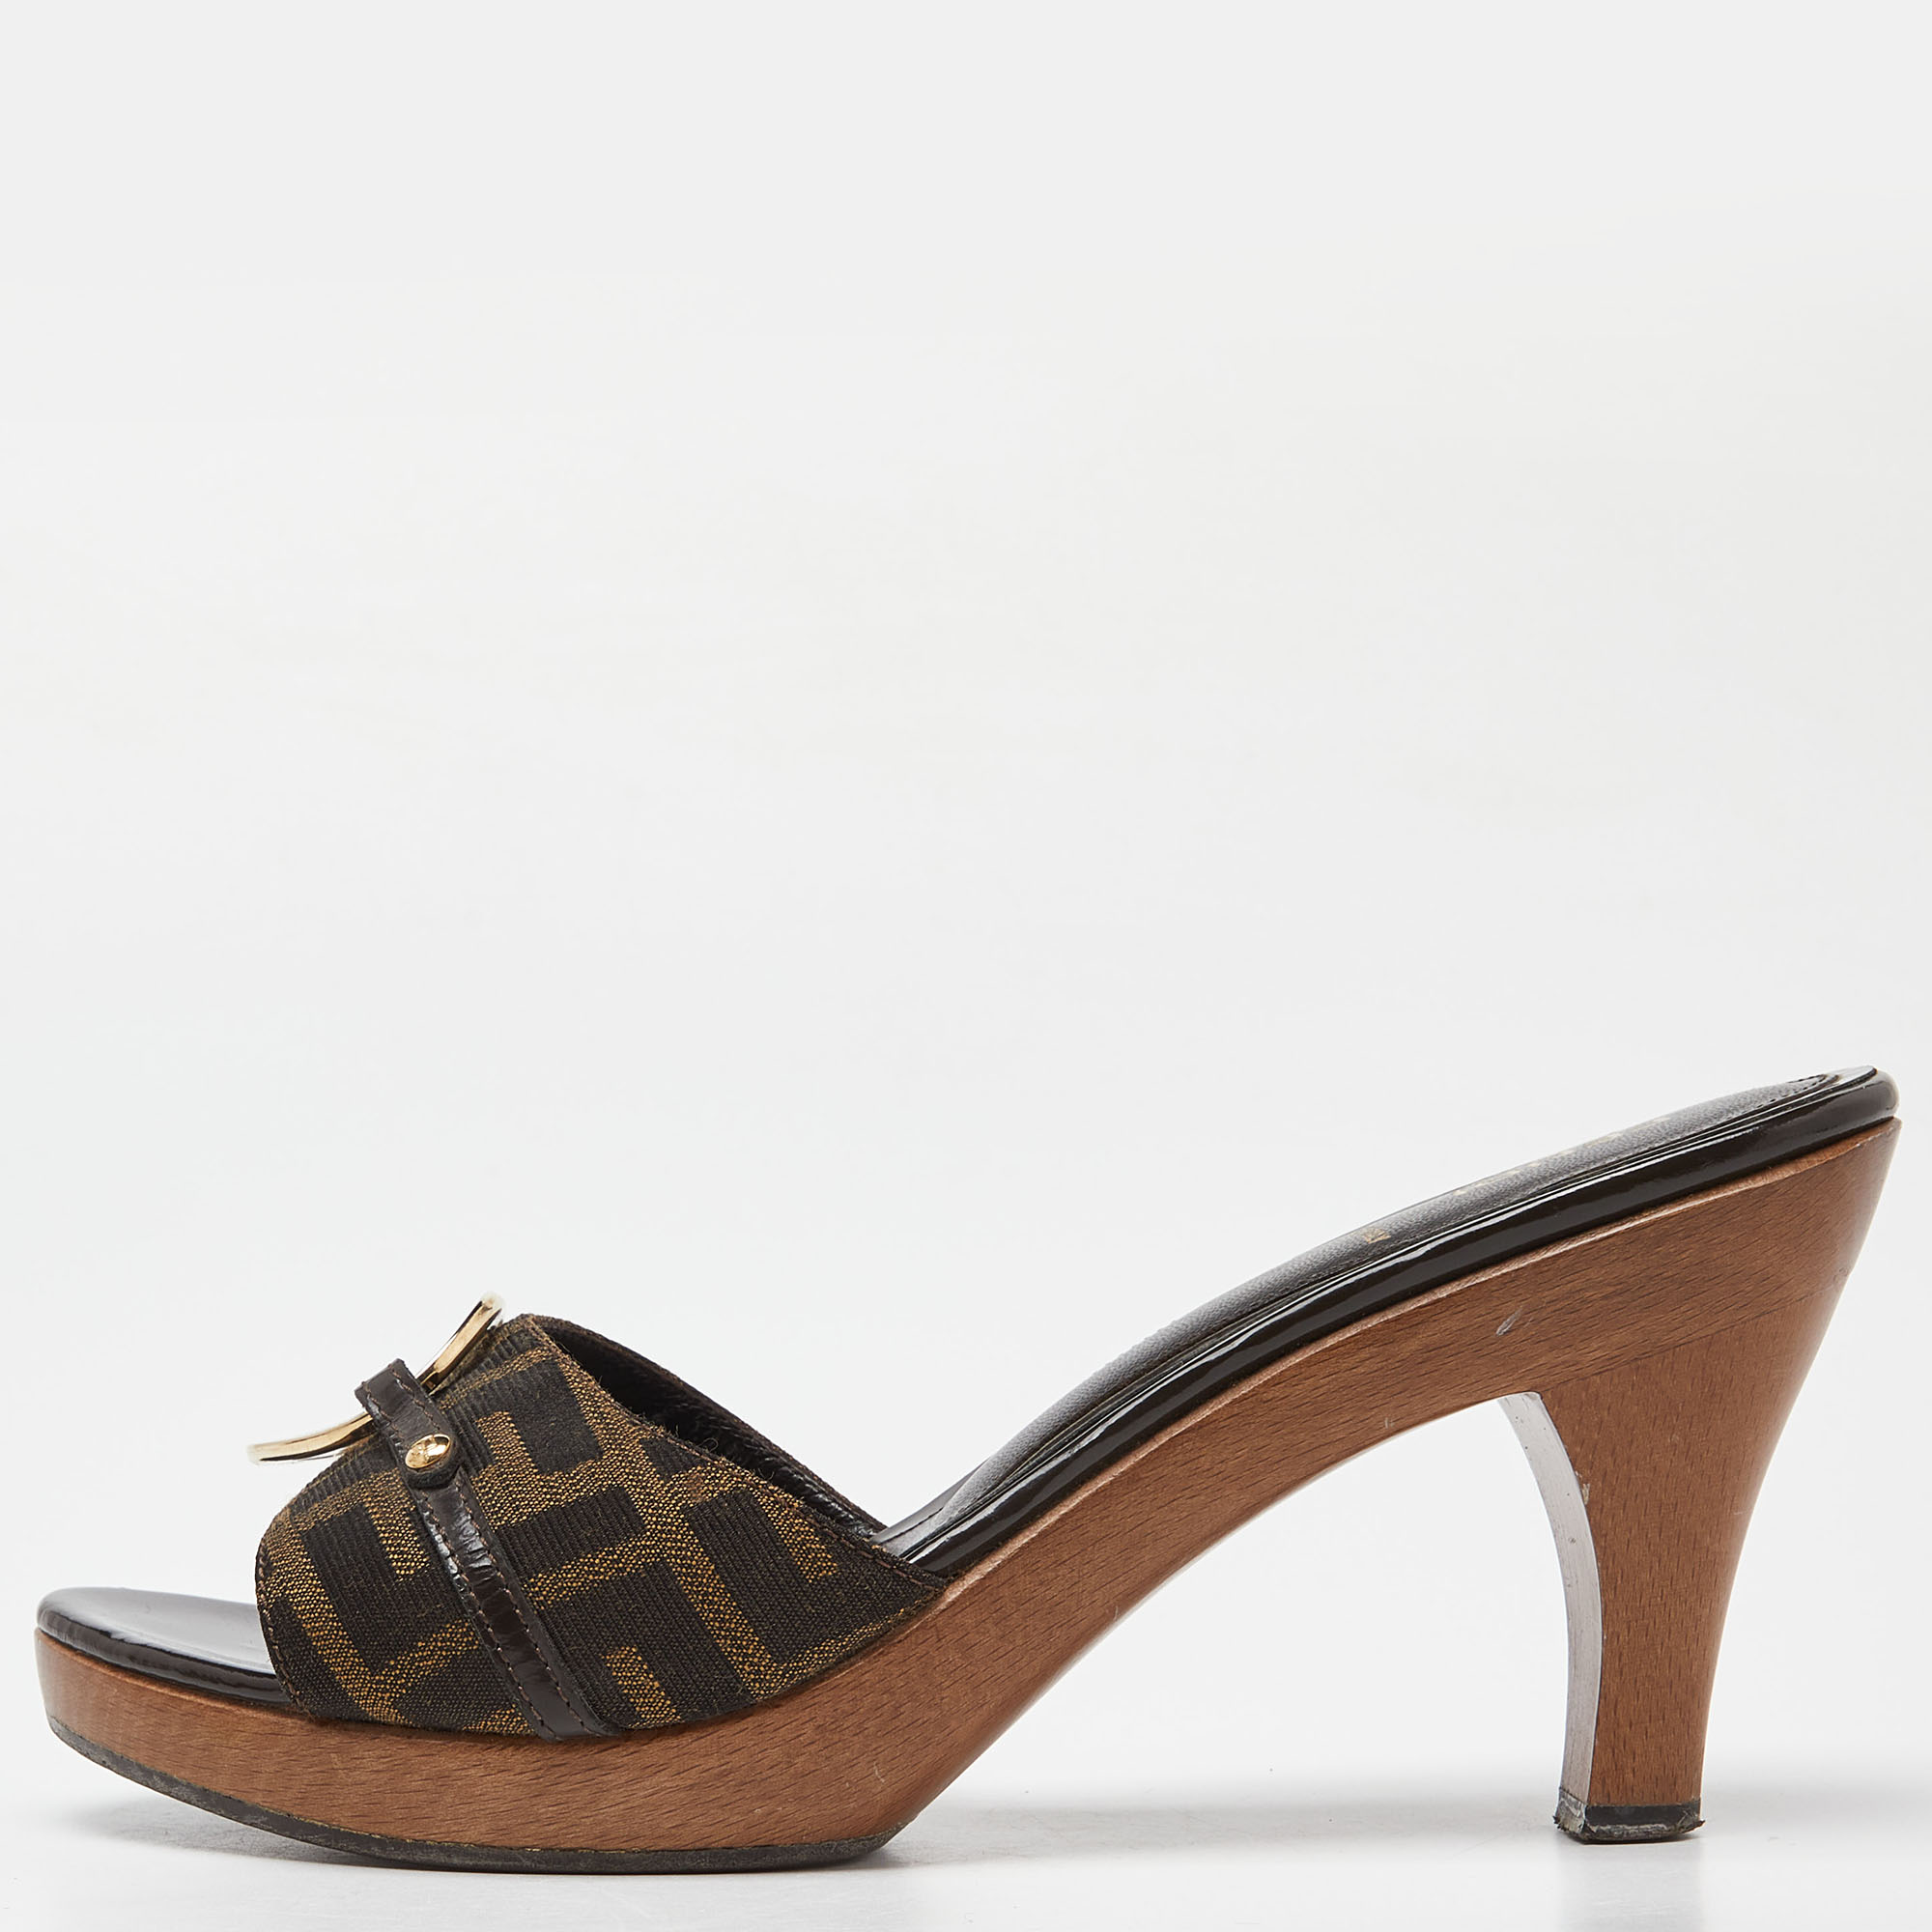 Fendi brown zucca canvas and leather platform open toe slide sandals size 38